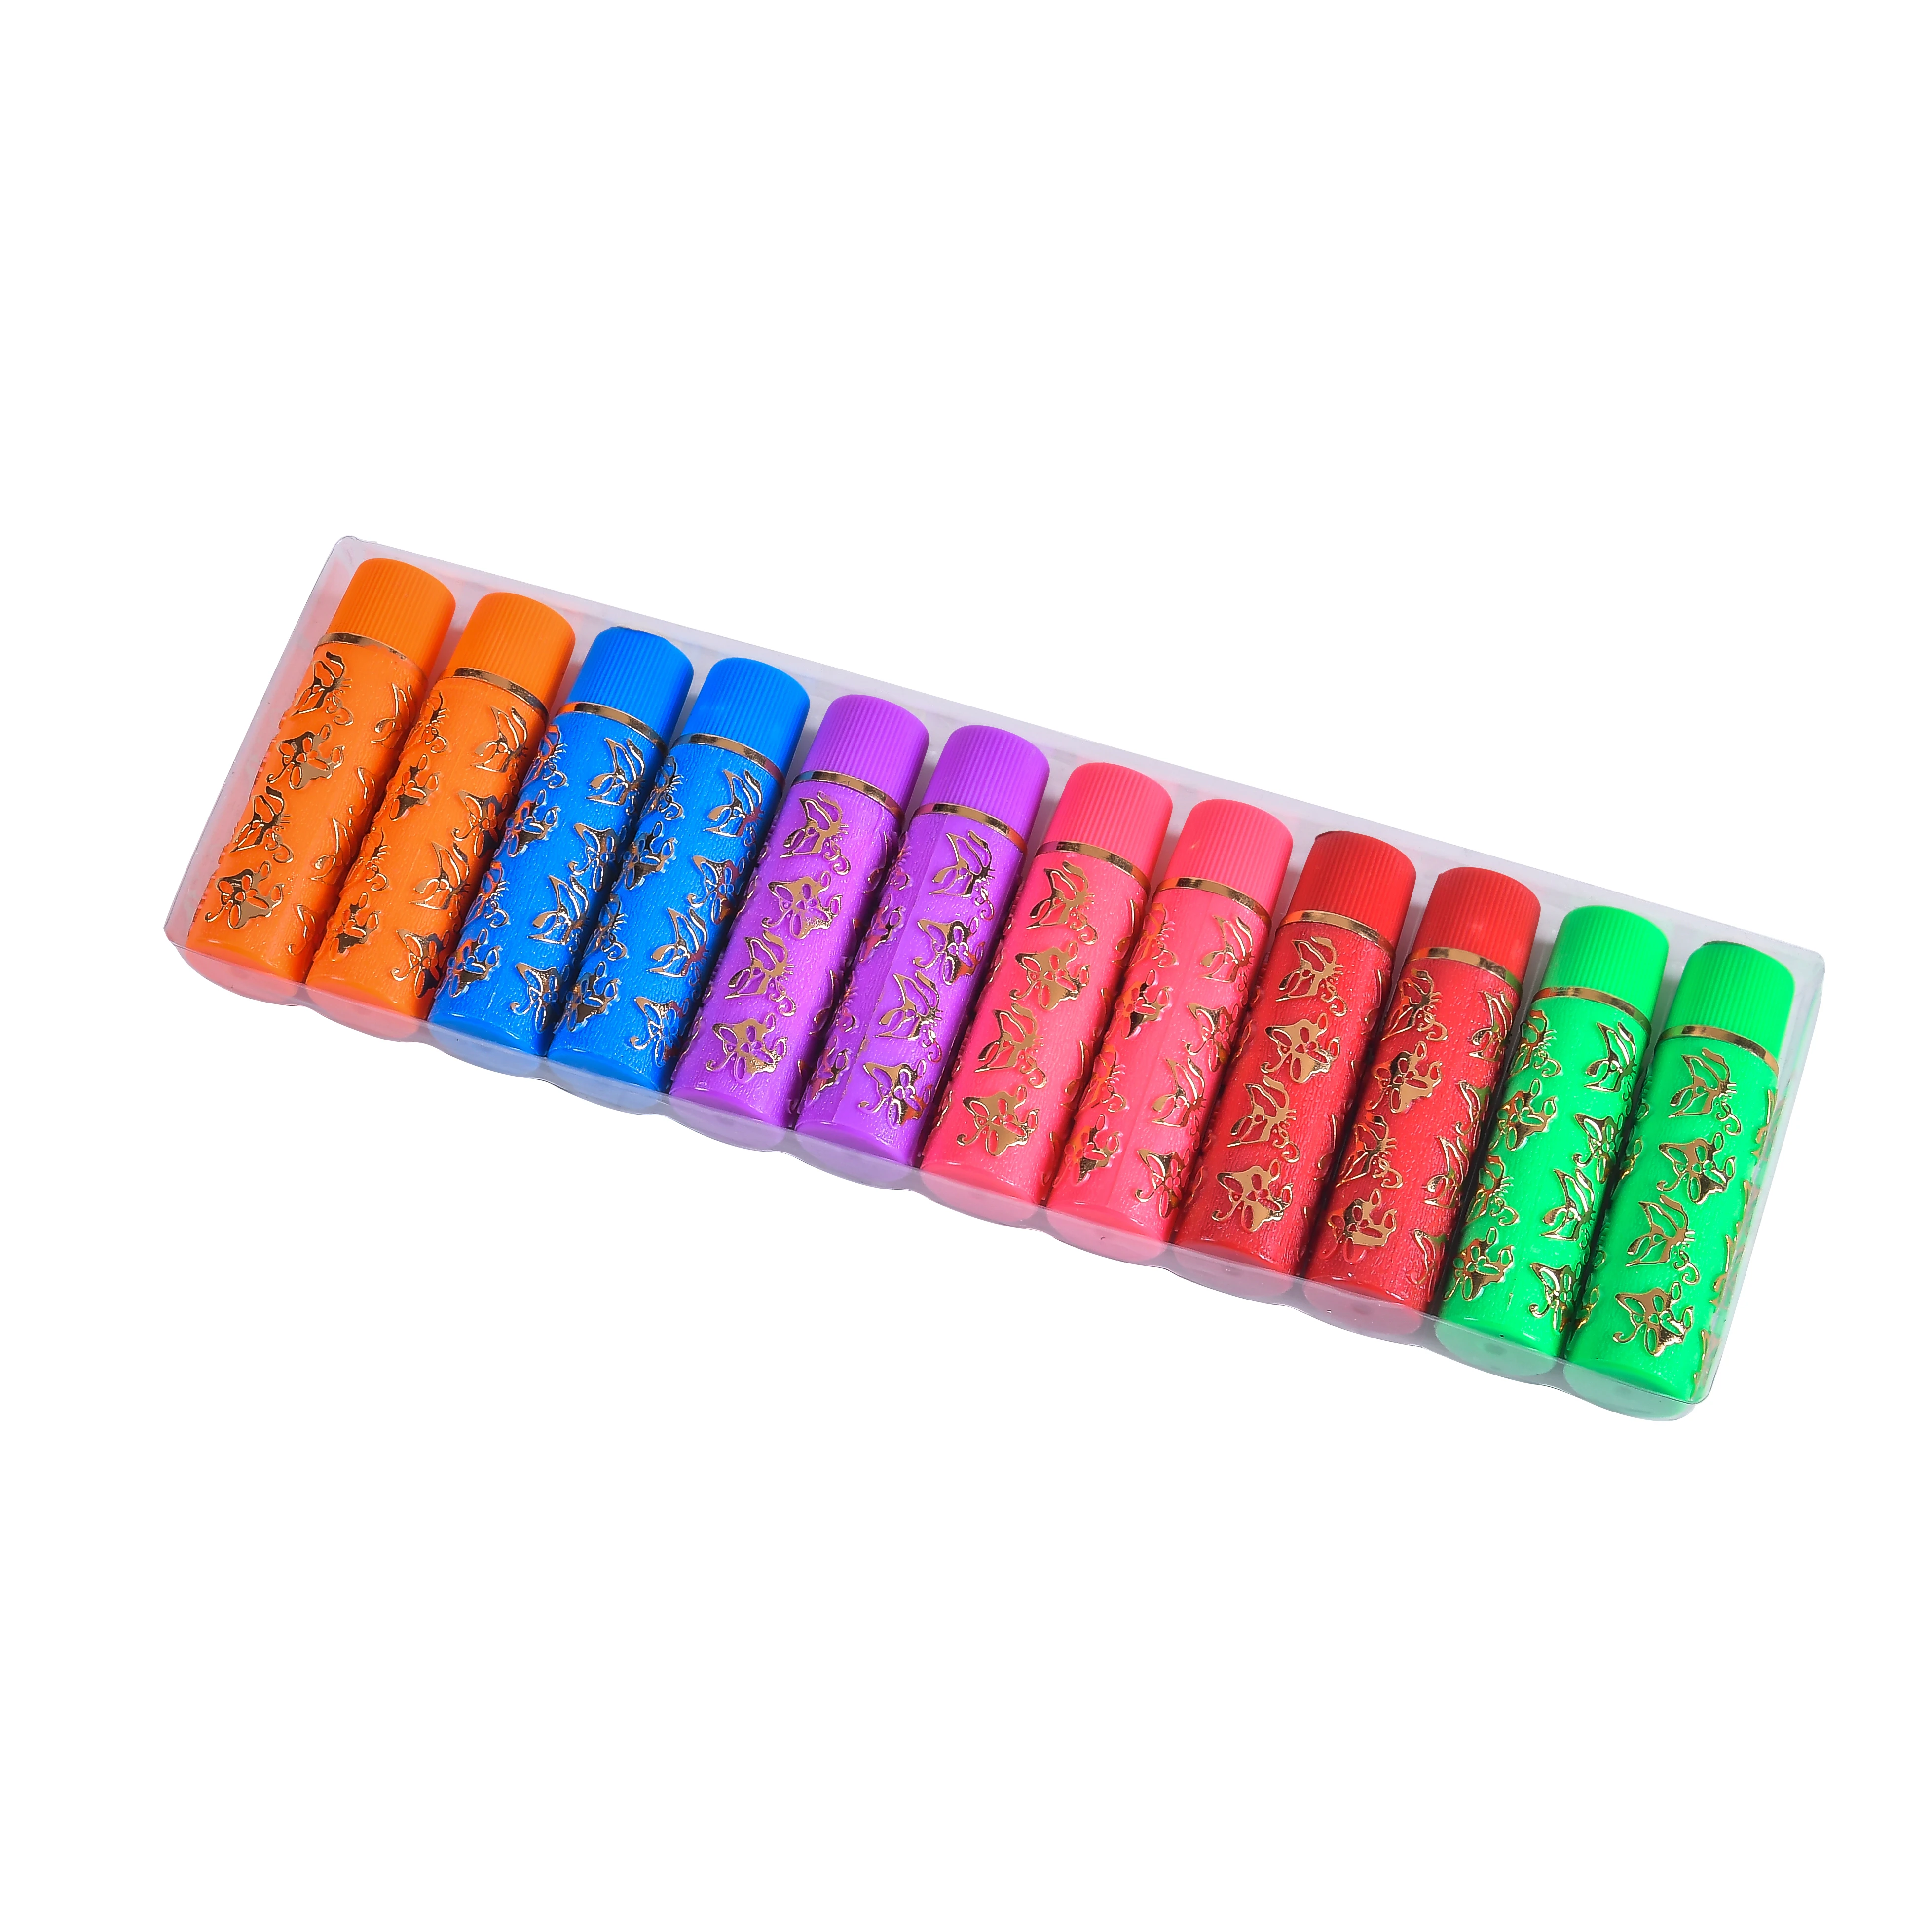 

12 Pieces Set Beauty Butterfly Tube Temperature Sense Magic Change Color Lipstick For Girls Lip Makeup Gloss cosmetic